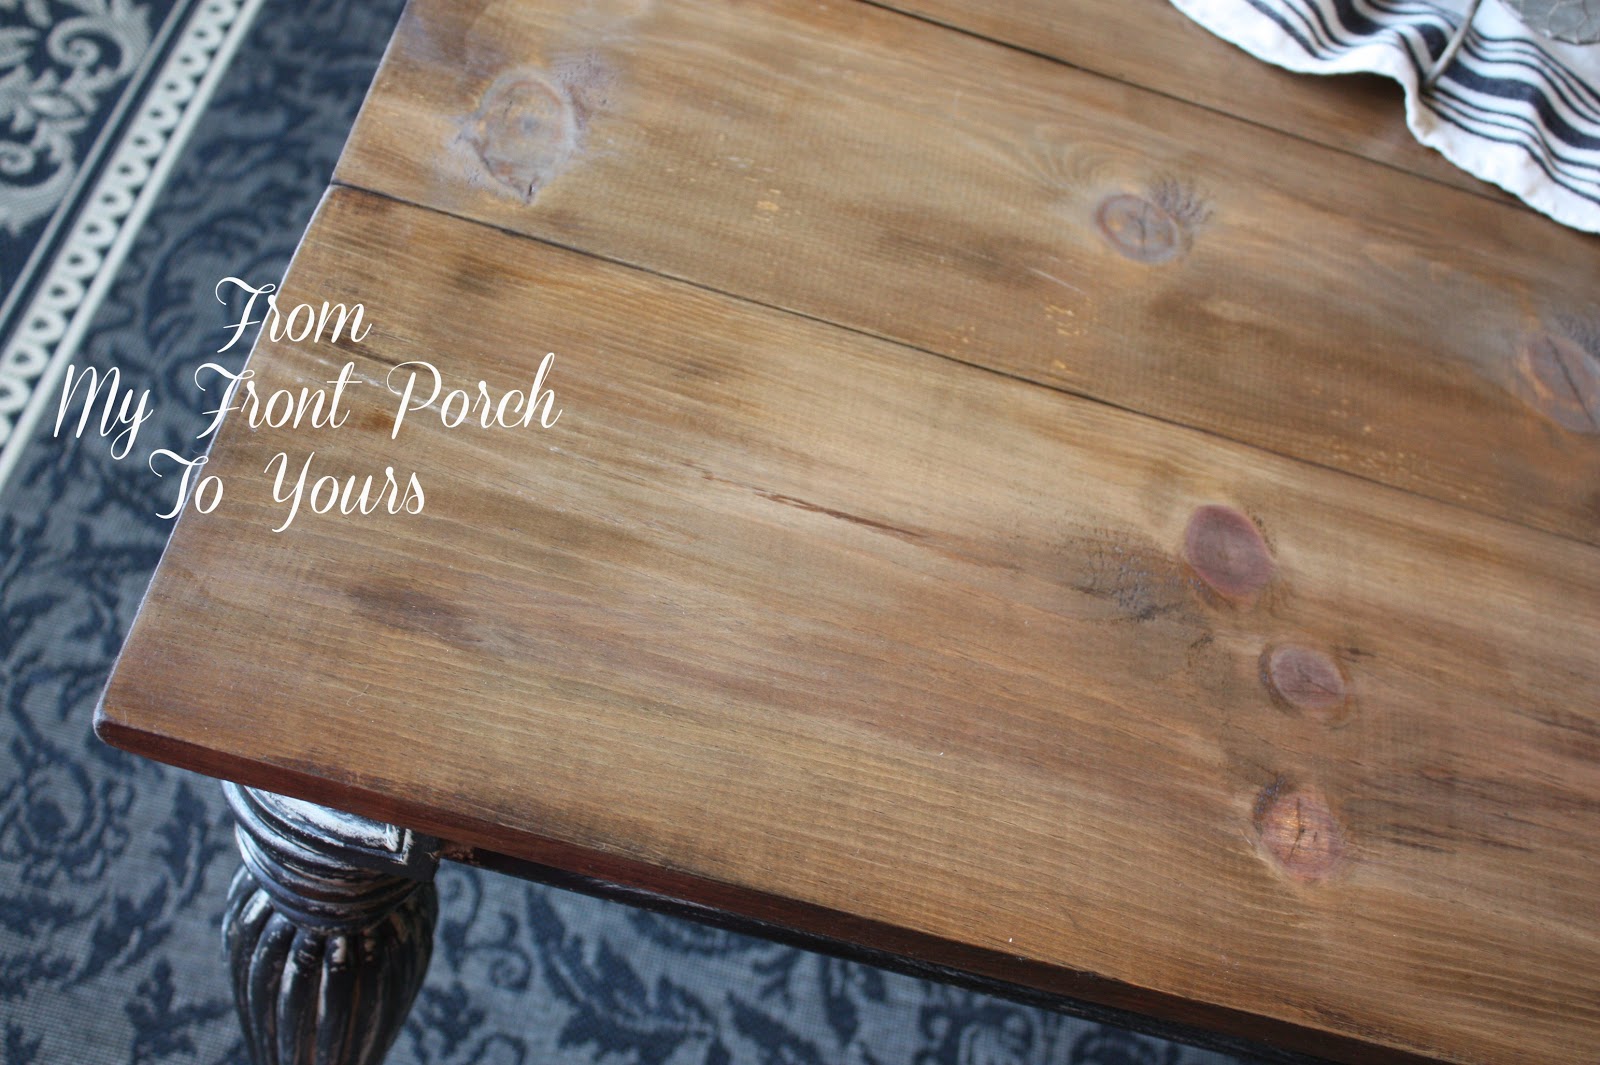 How to build a table top (with old wood)